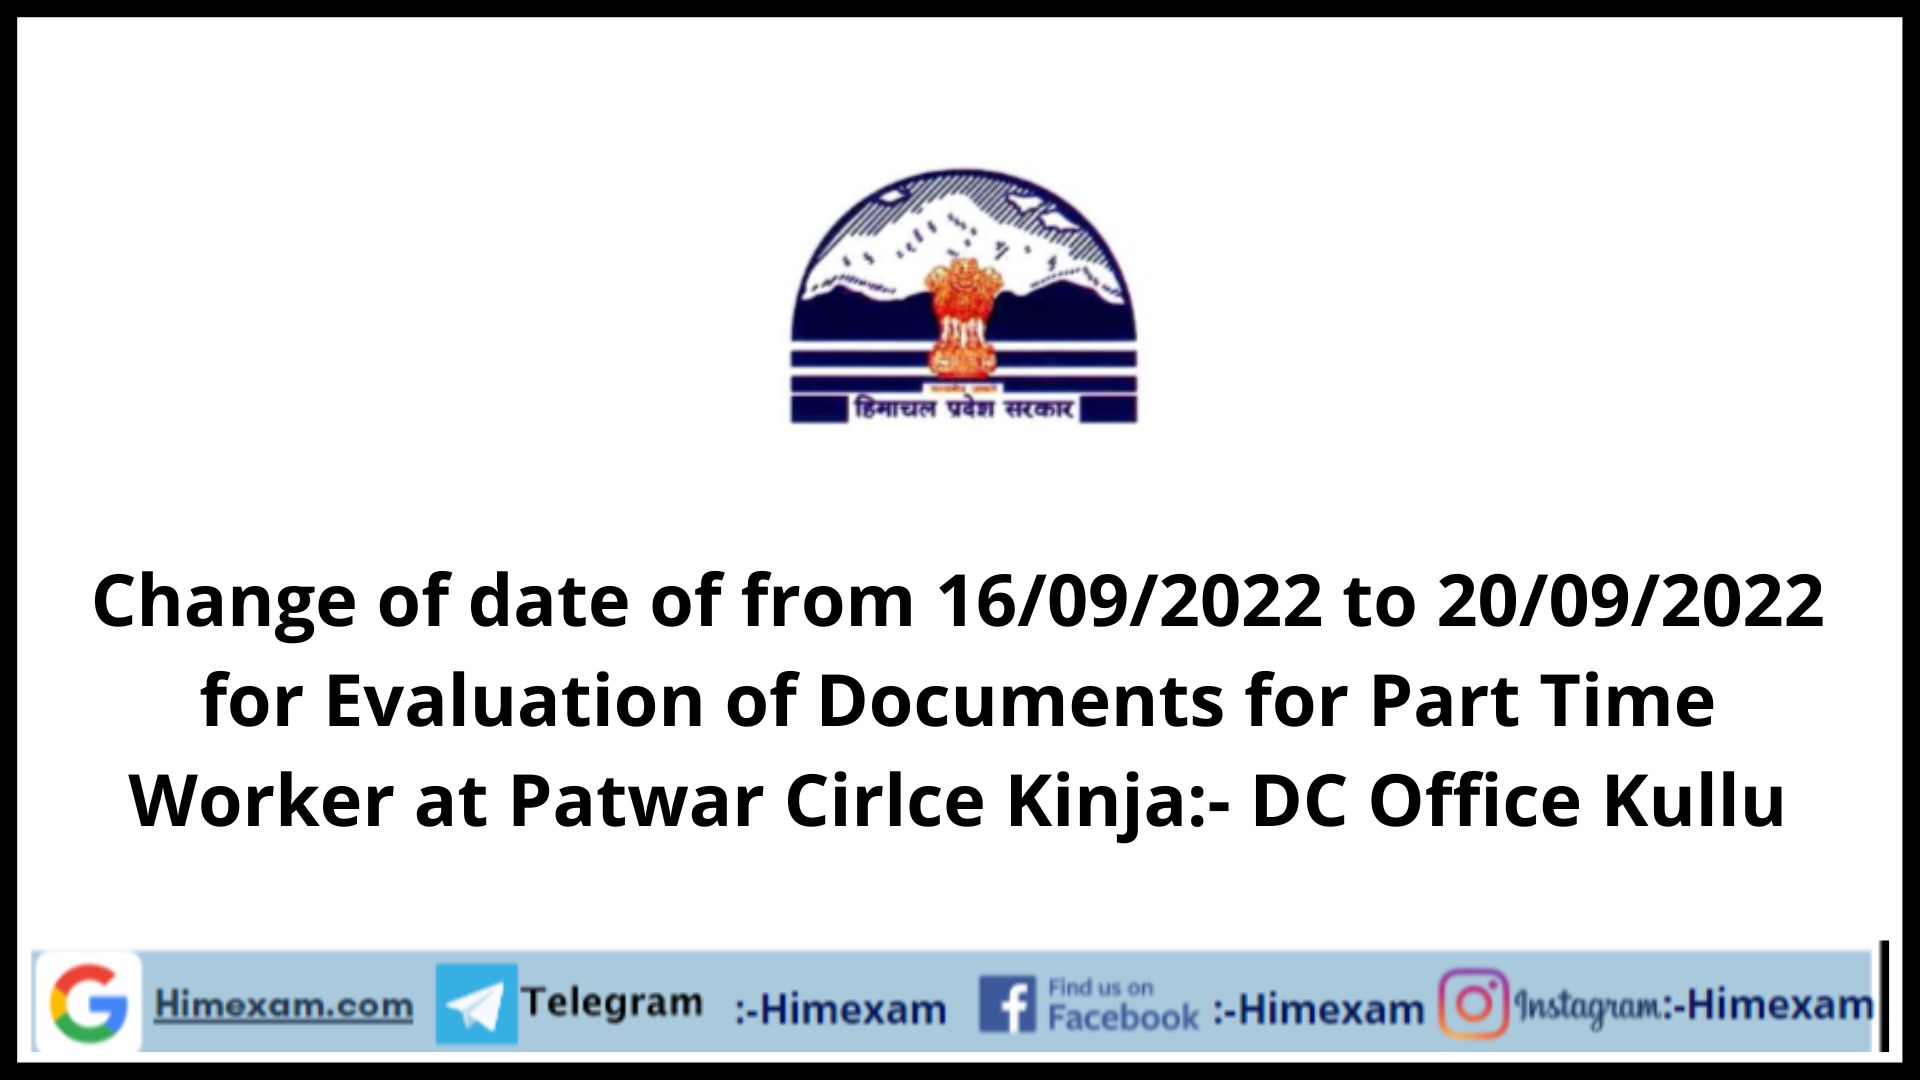 Change of date of from 16/09/2022 to 20/09/2022 for Evaluation of Documents for Part Time Worker at Patwar Cirlce Kinja:- DC Office Kullu